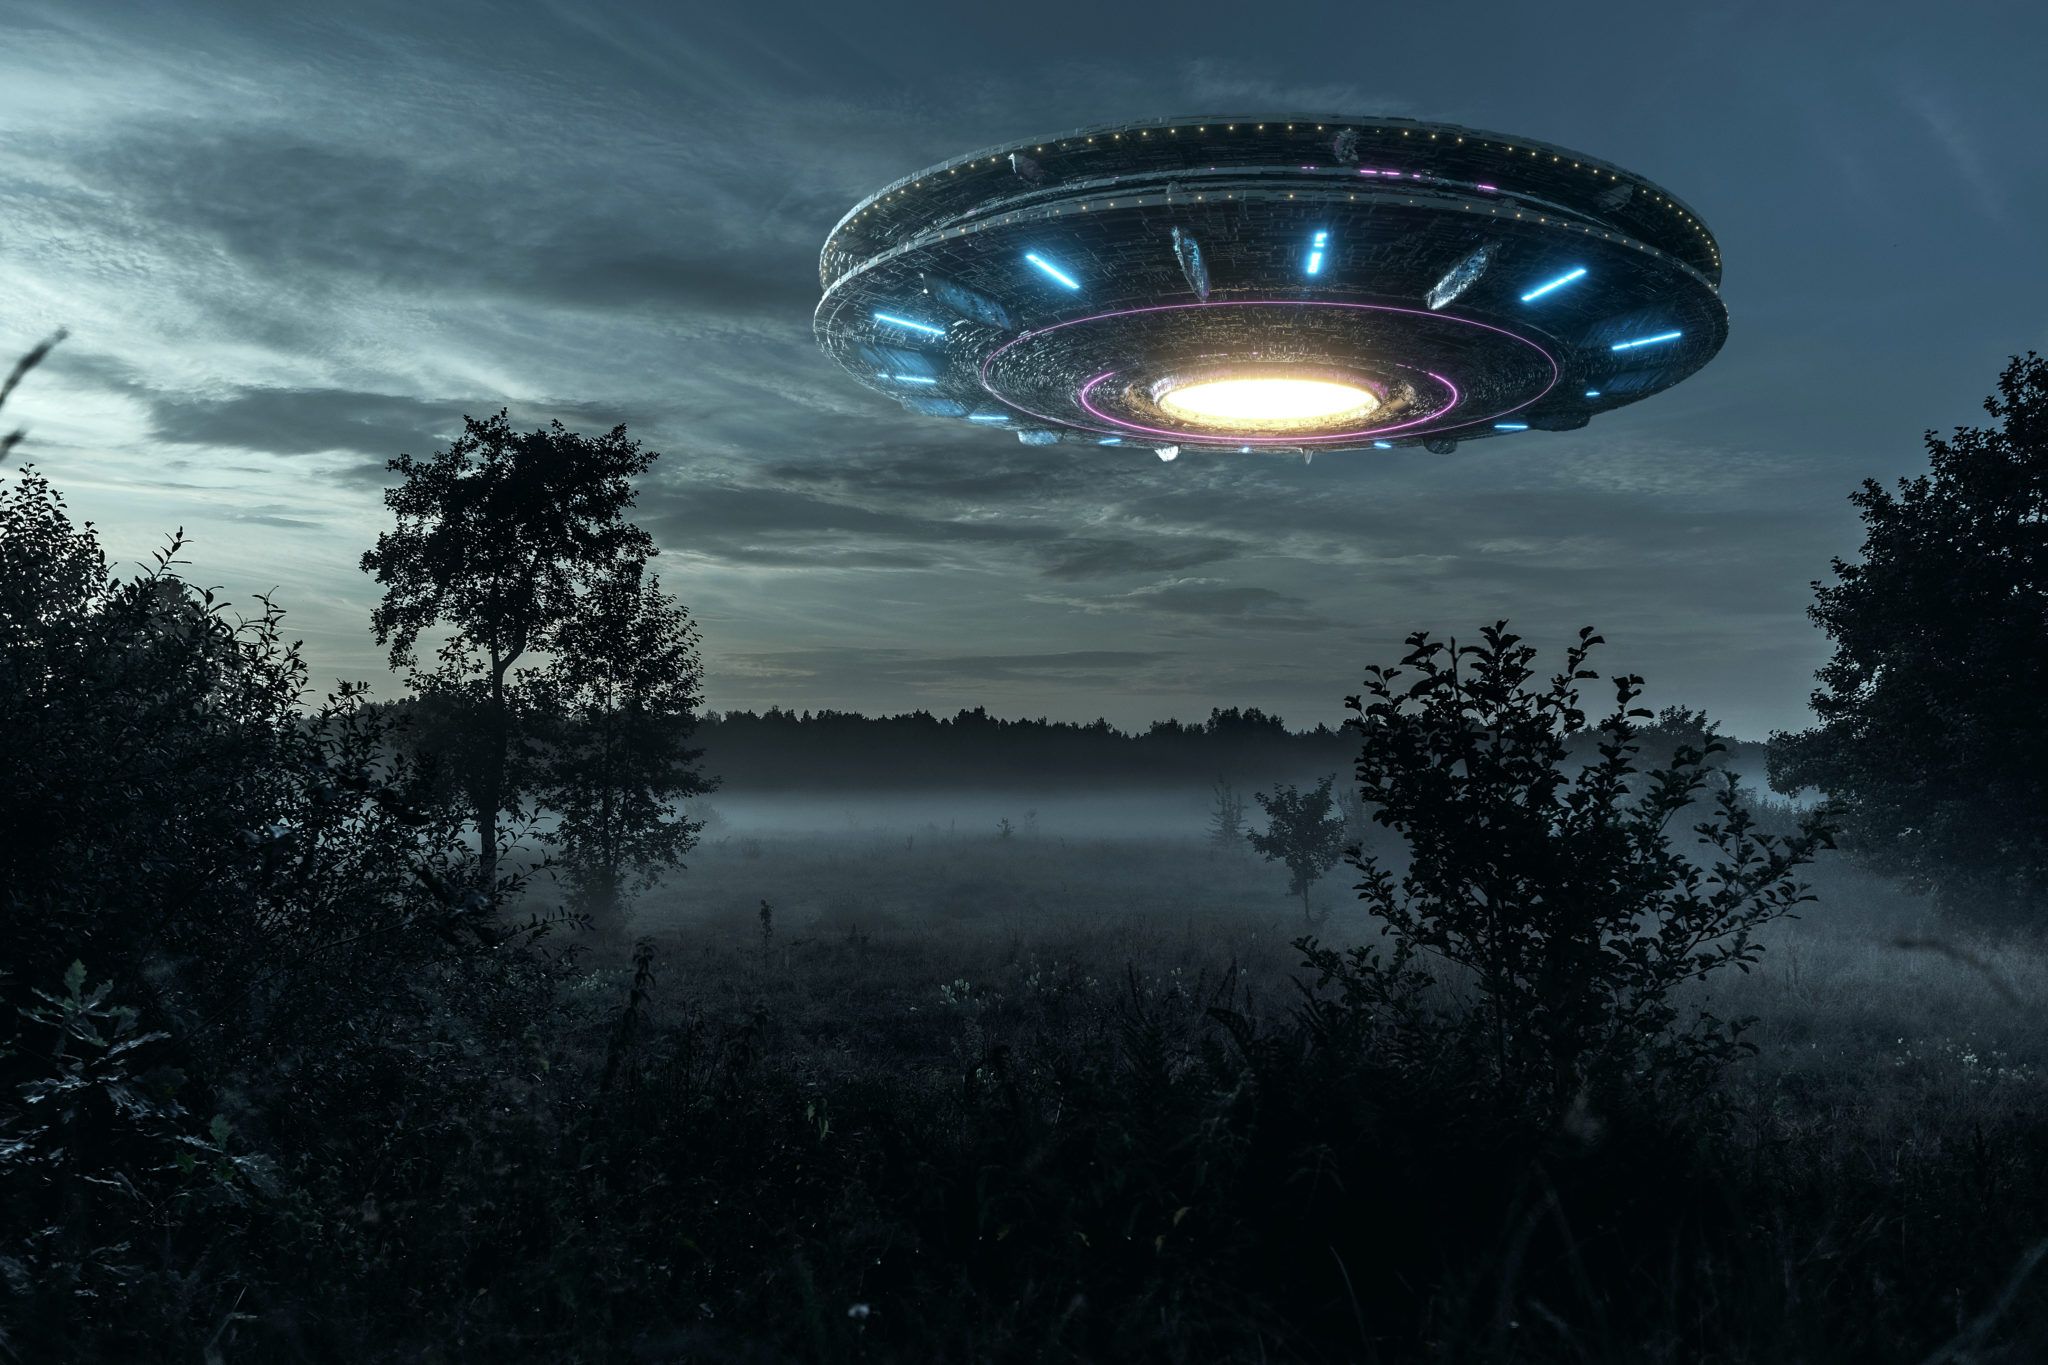 Aliens to invade earth today and abduct thousands of humans, according to time traveller